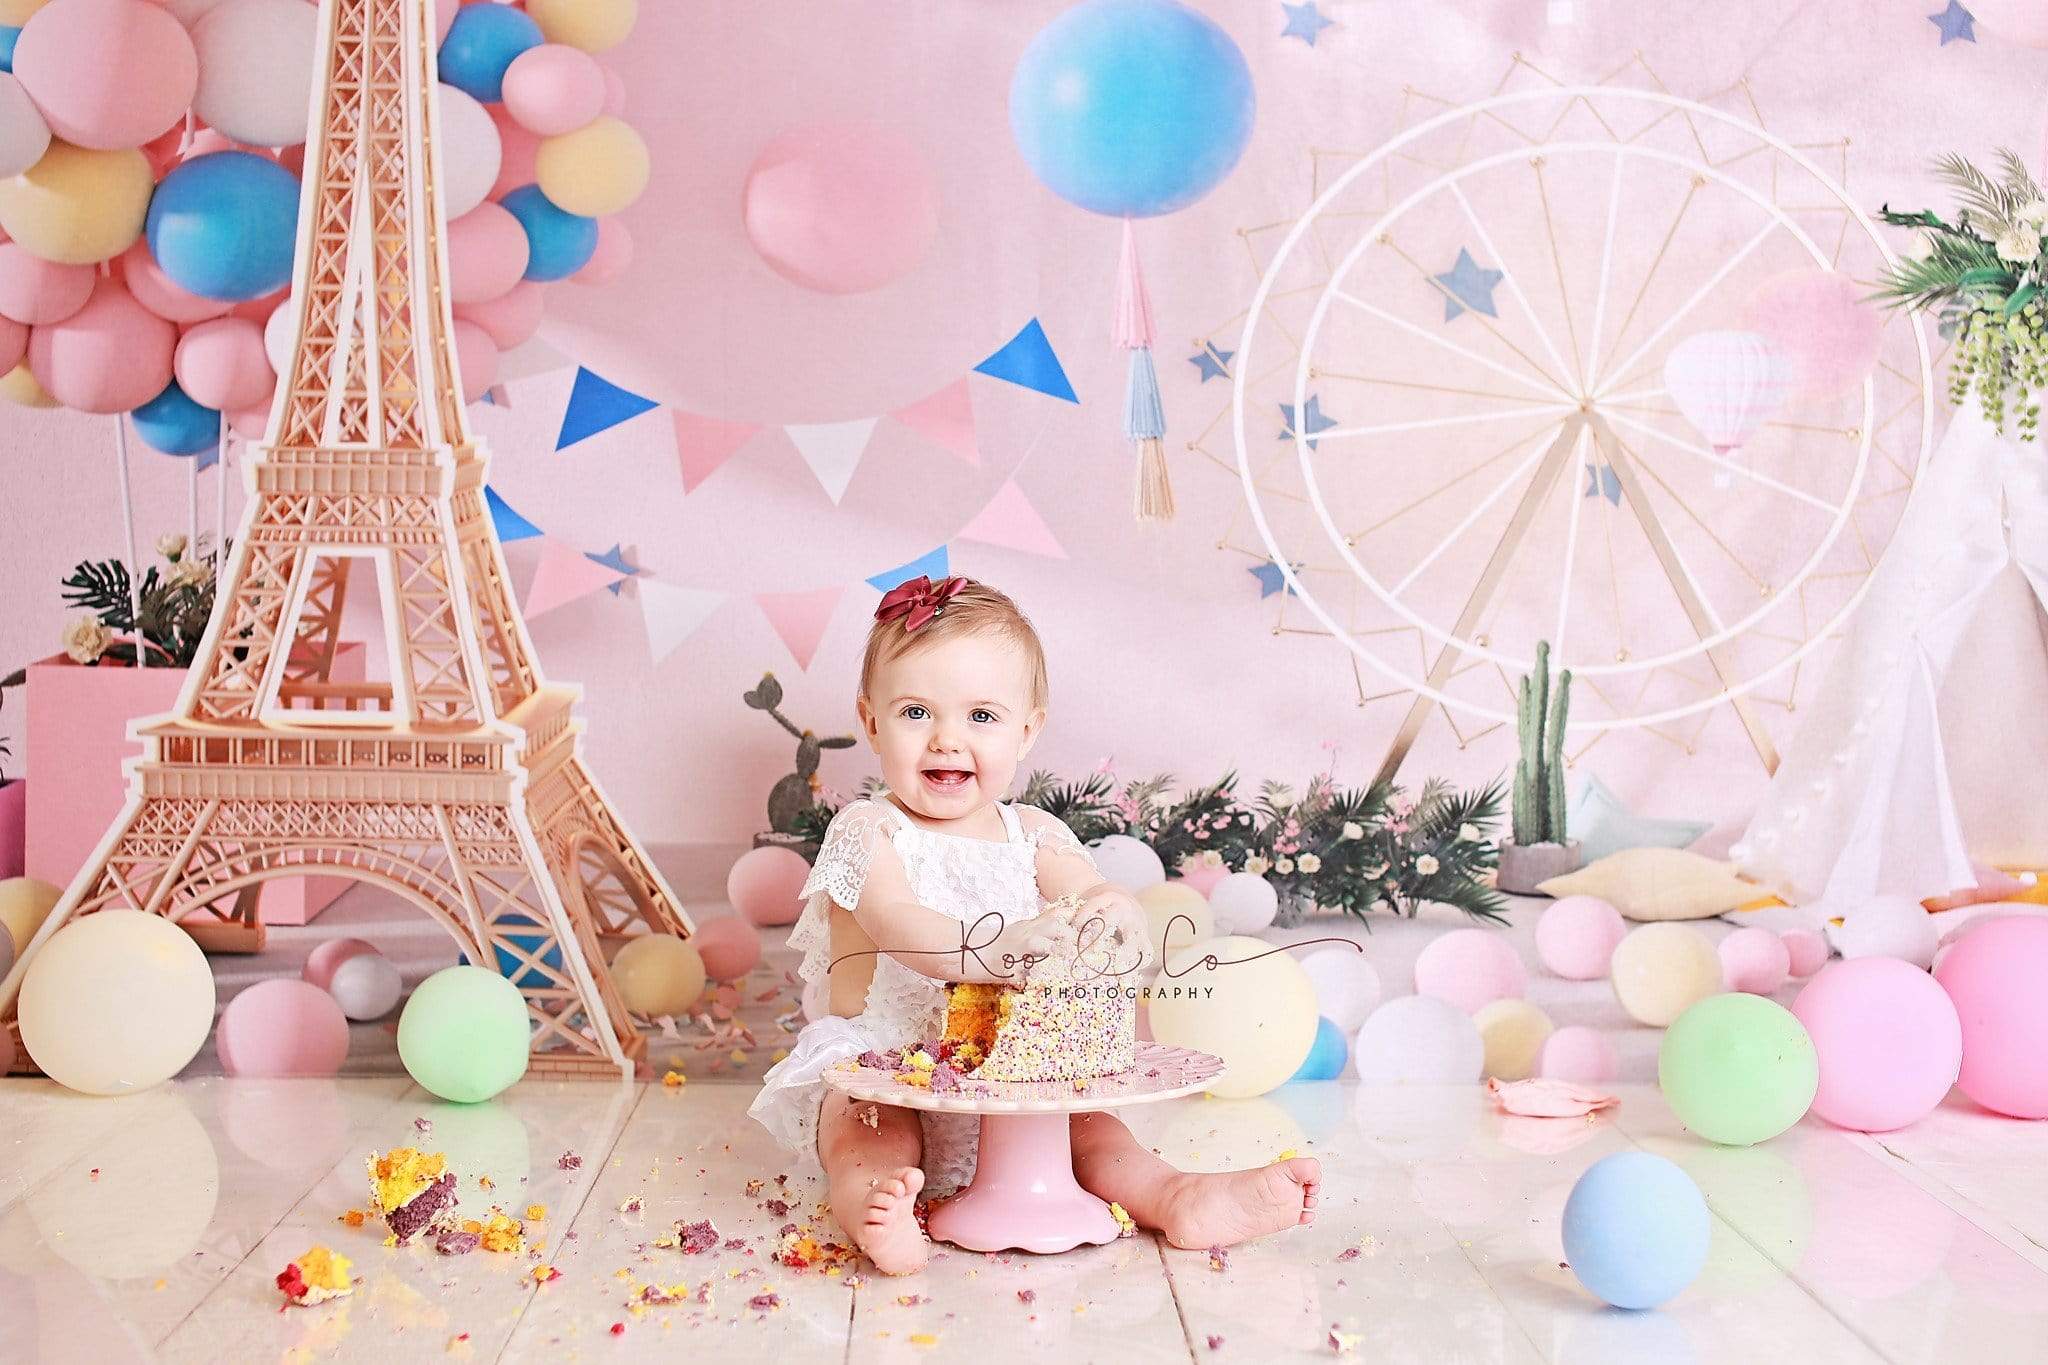 Kate Children Travel Around the World Cake Smash Backdrop for Photography